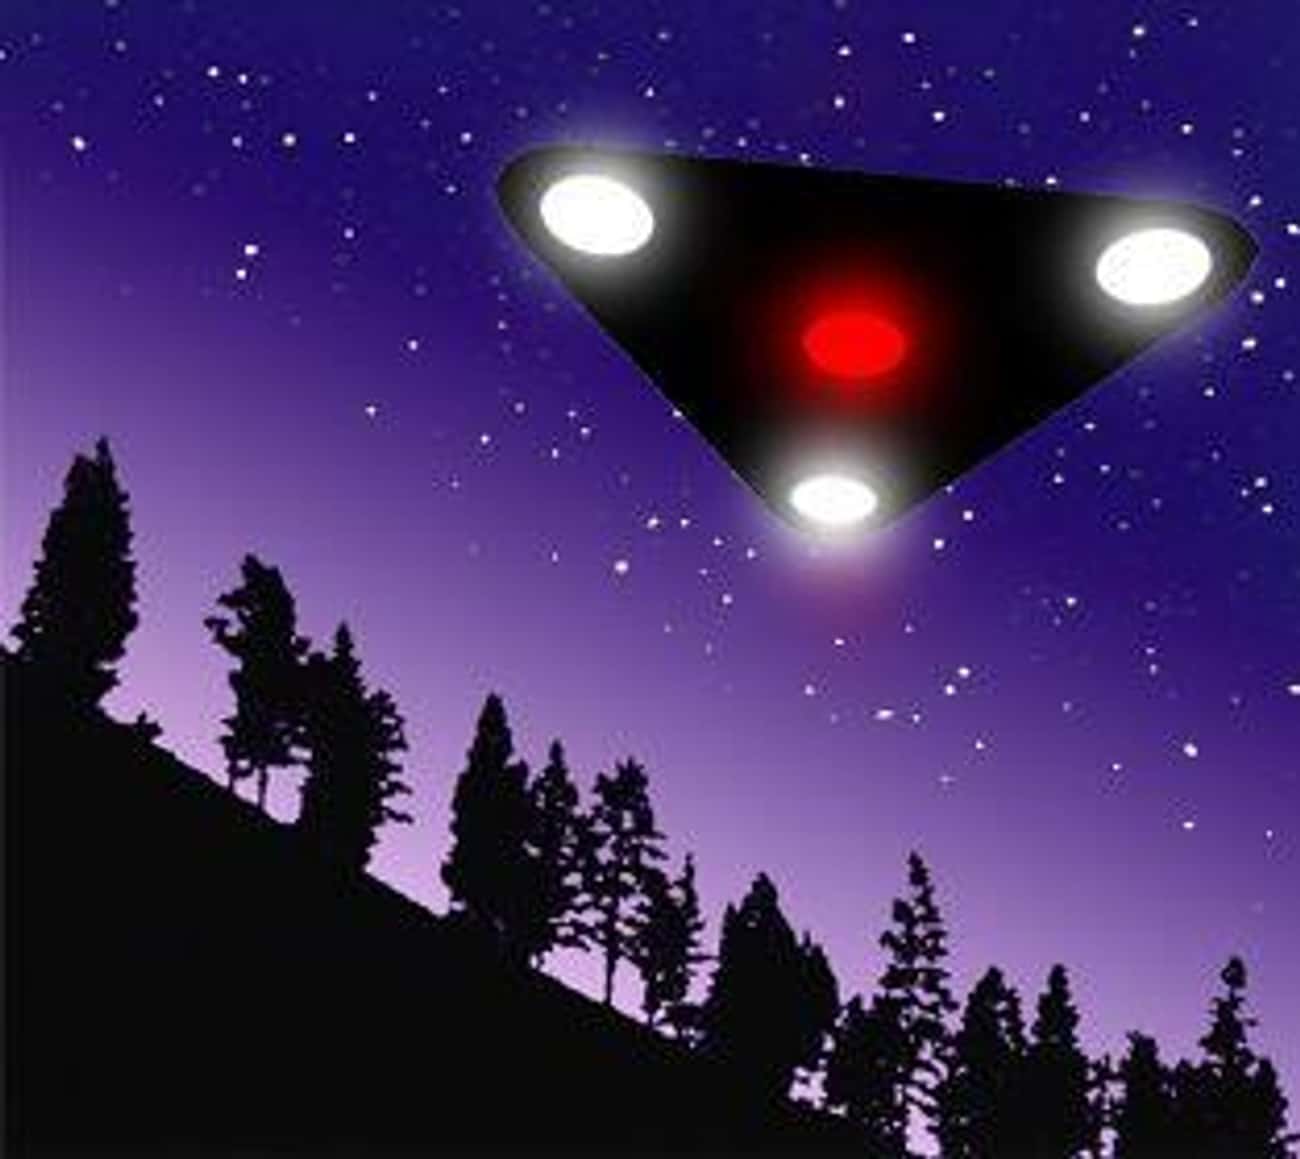 The Area Is Also Home To UFO Activity